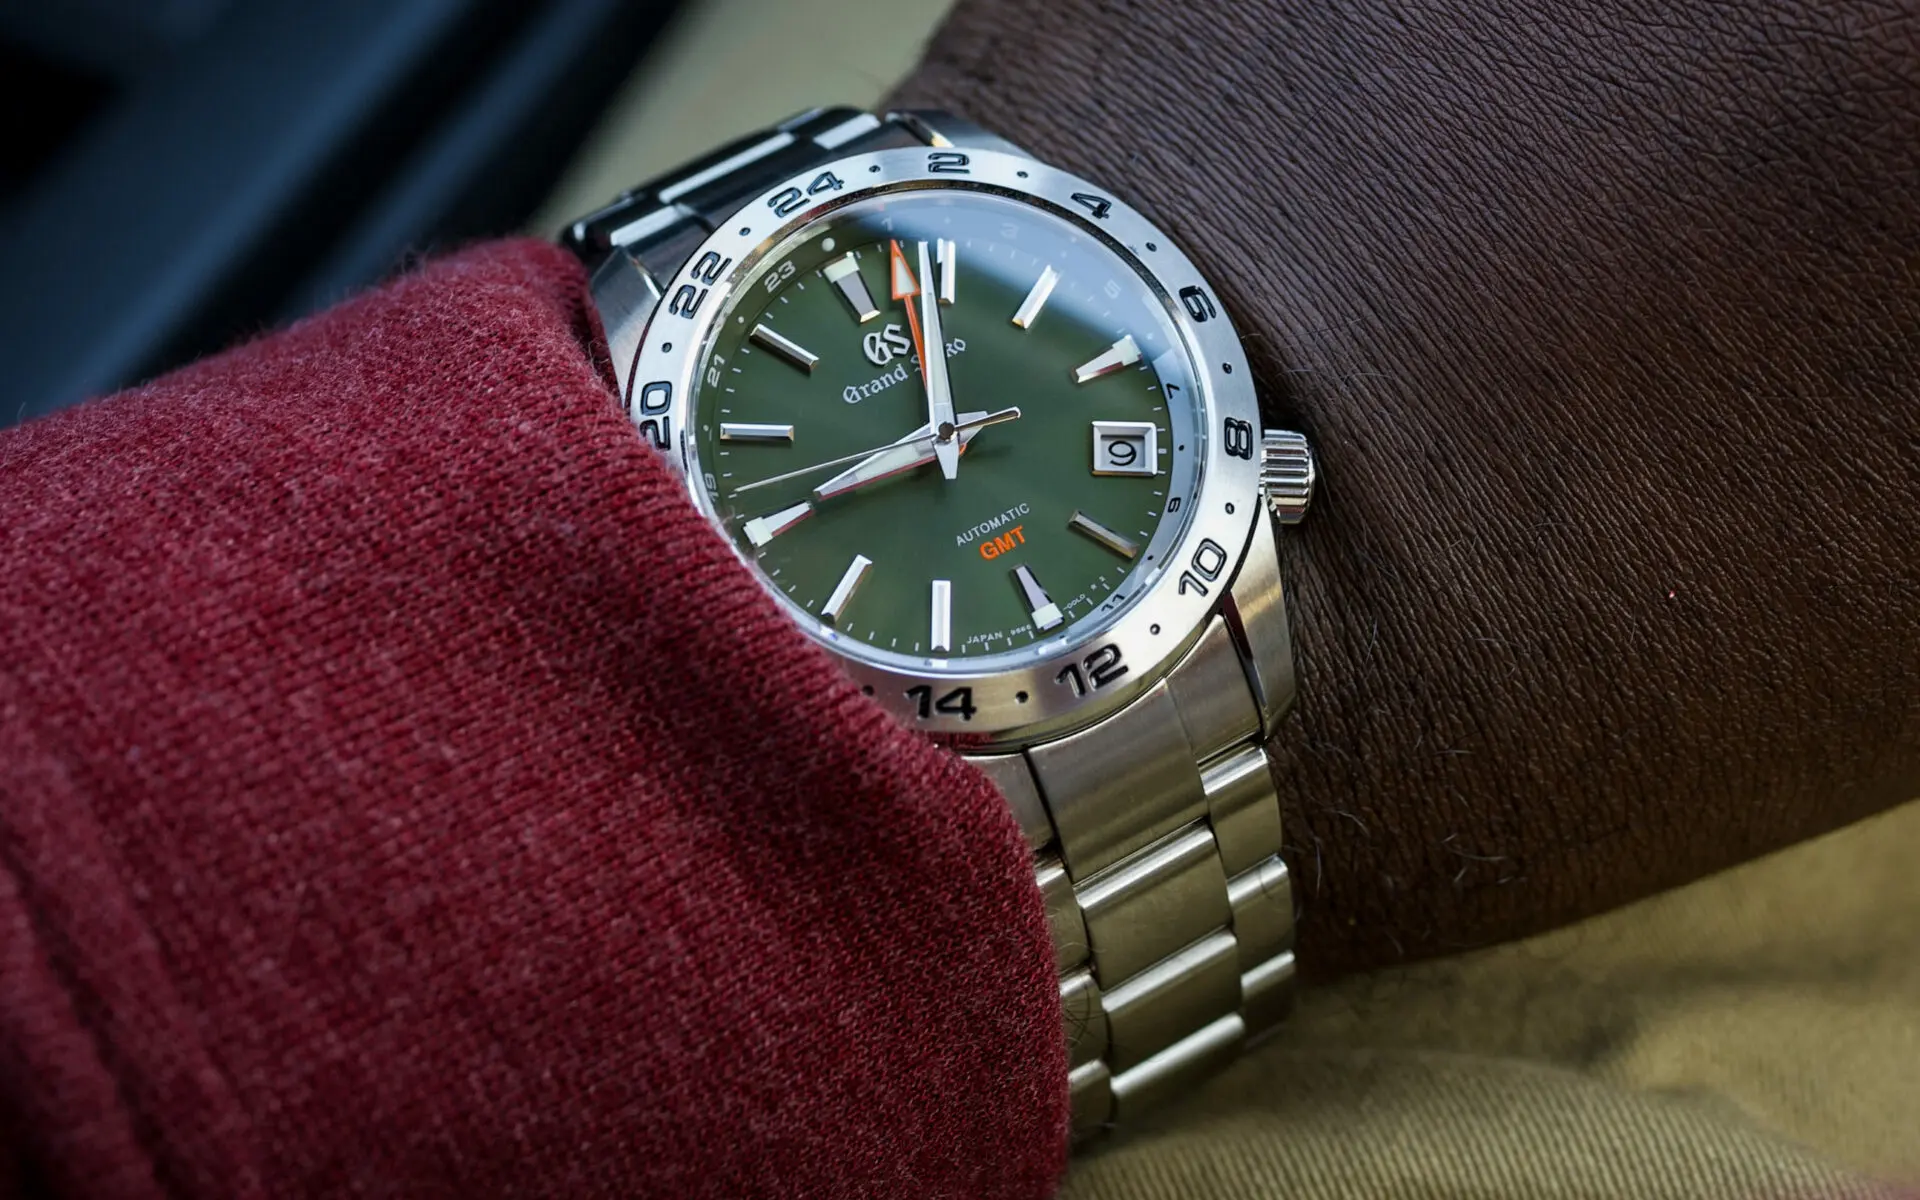 Ricardo Finds Horological Bliss with the Grand Seiko Sport SBGM247